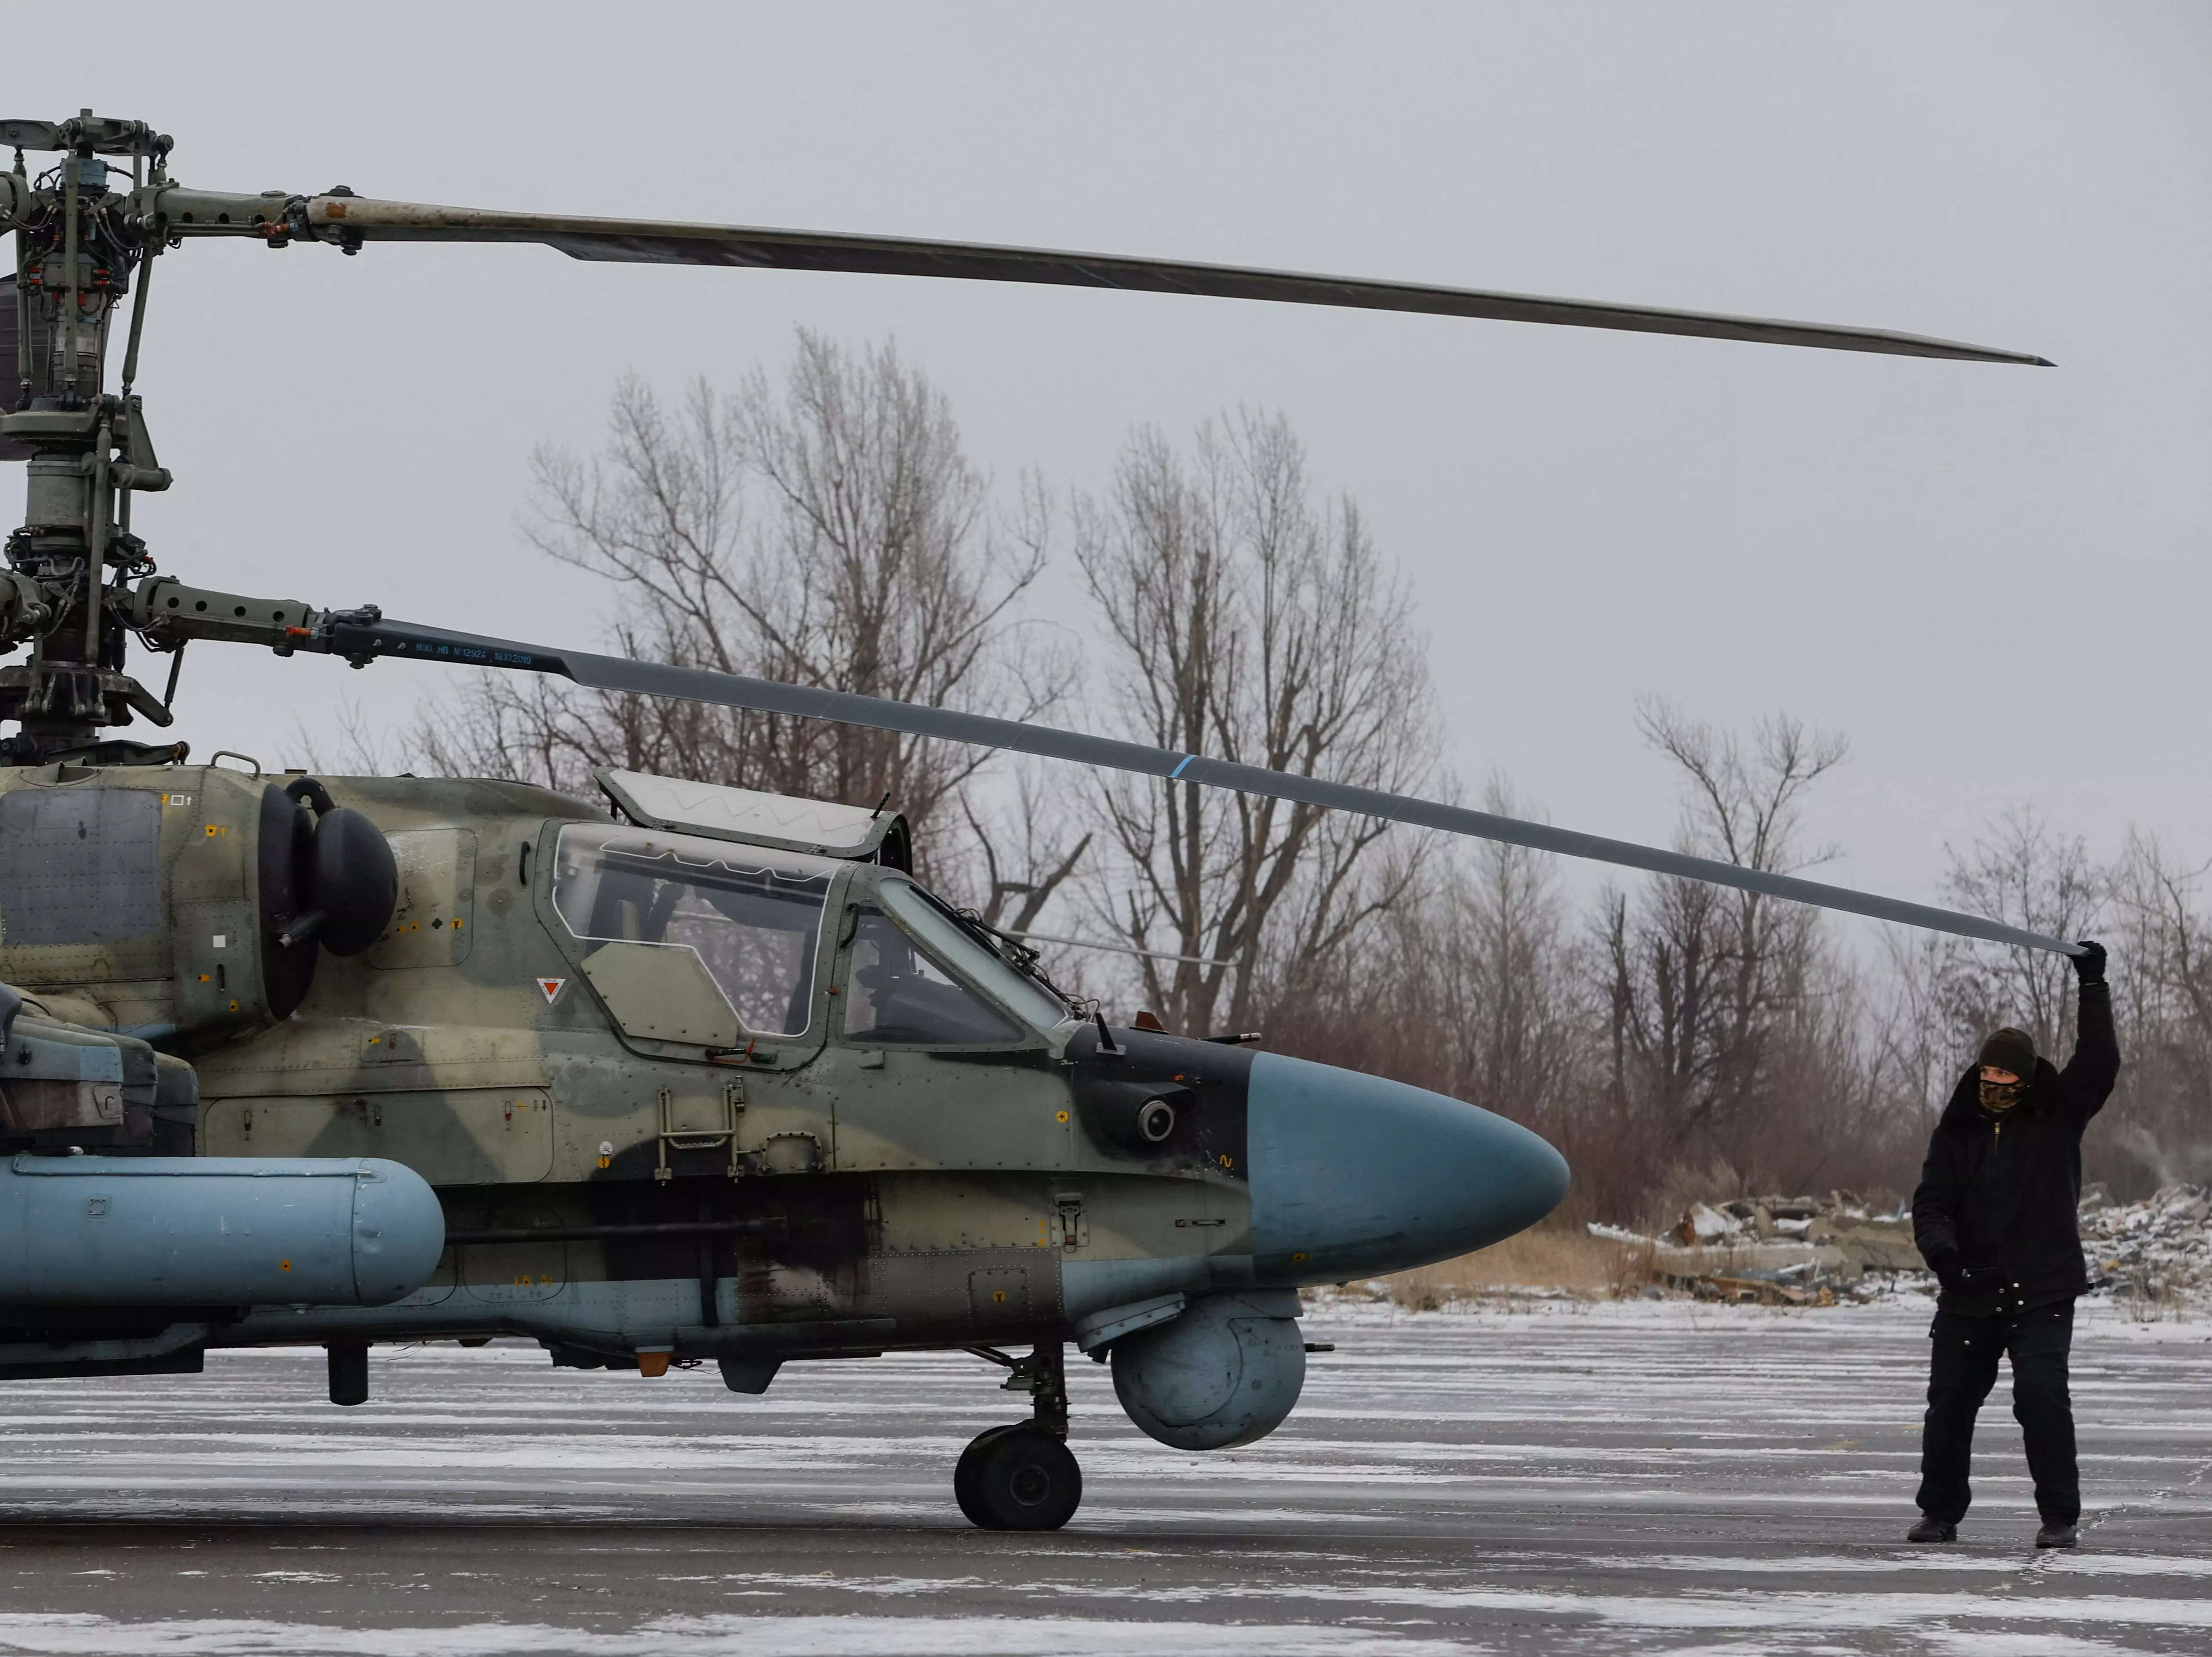 A serviceman checks a Russian Ka-52 "Alligator" attack helicopter in Luhansk.